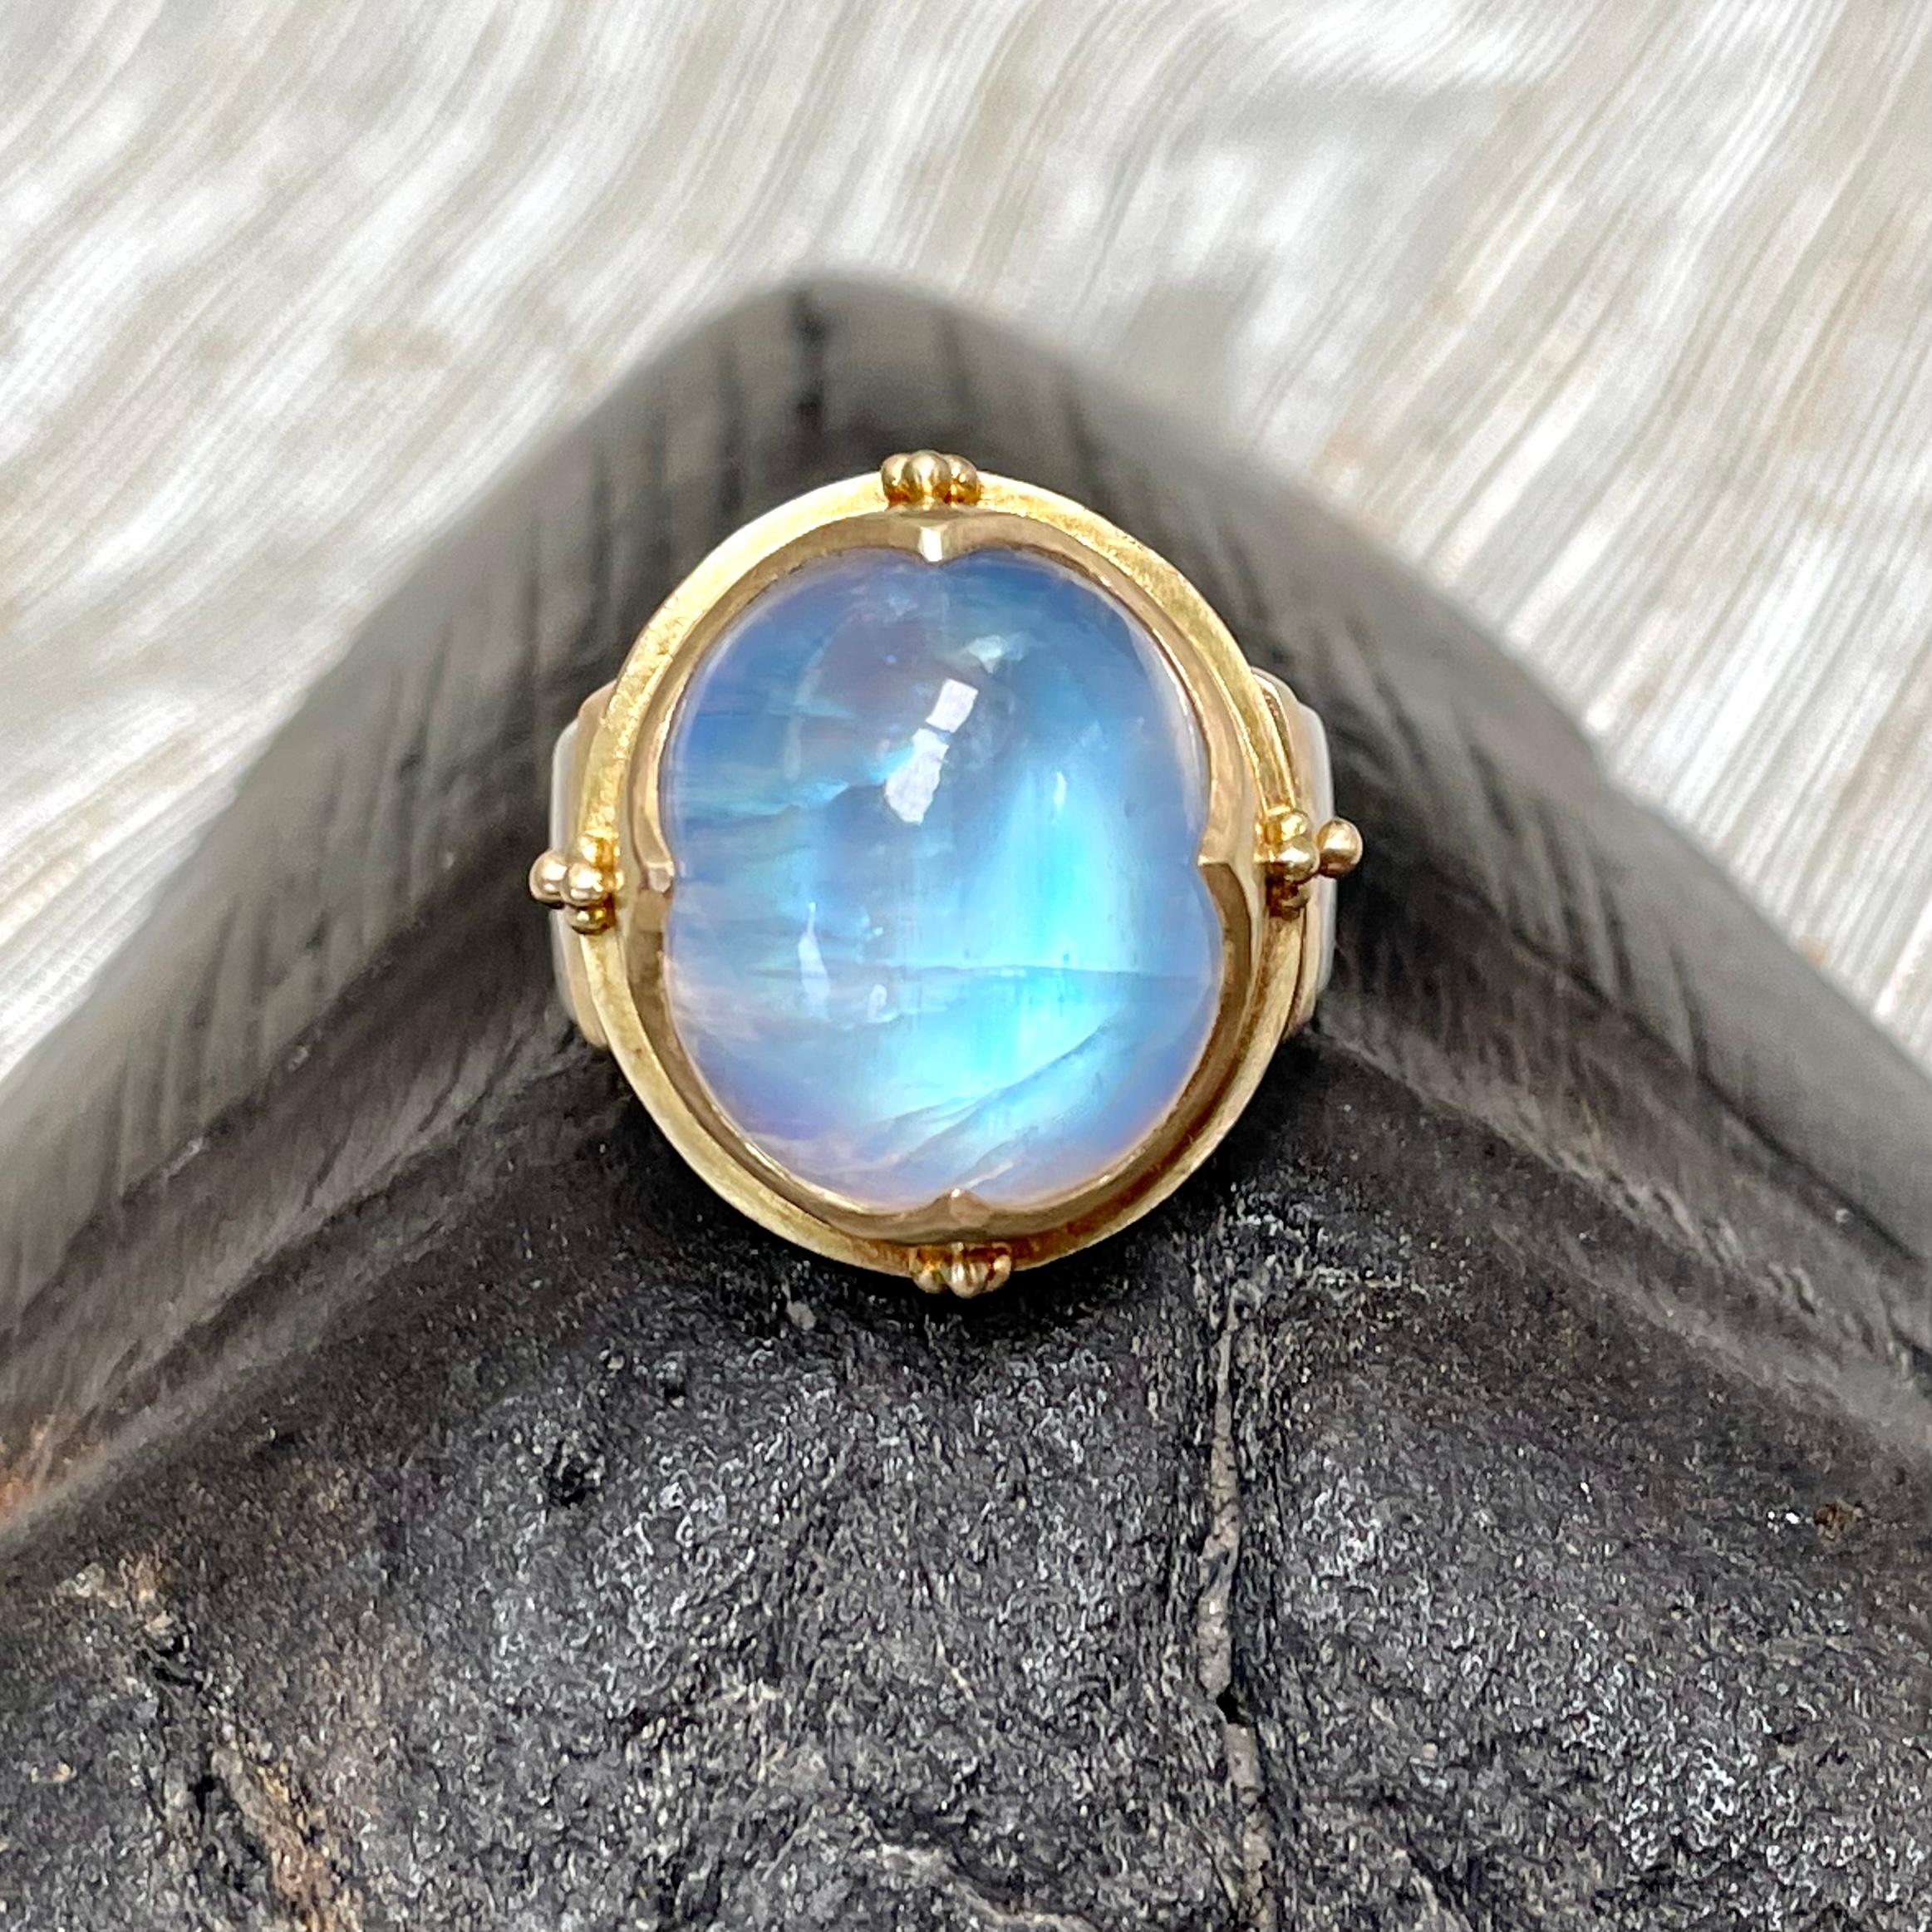 A beautiful blue 15 x 17 mm oval cabochon rainbow moonstone is held in a signature 